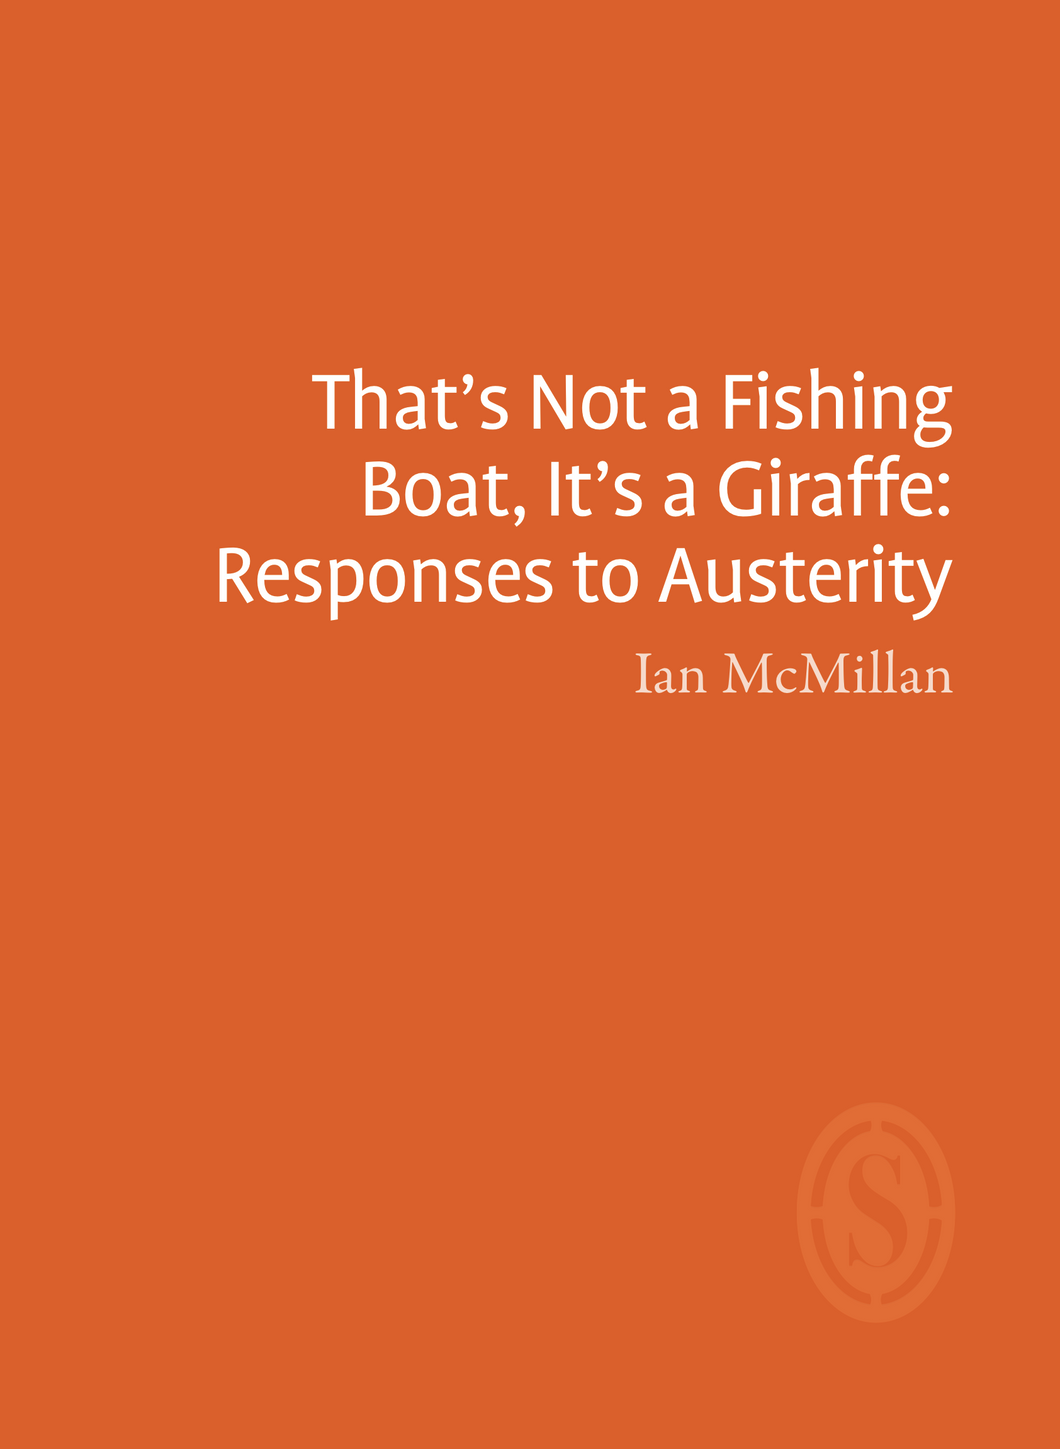 That's Not a Fishing Boat, It's a Giraffe: Responses to Austerity